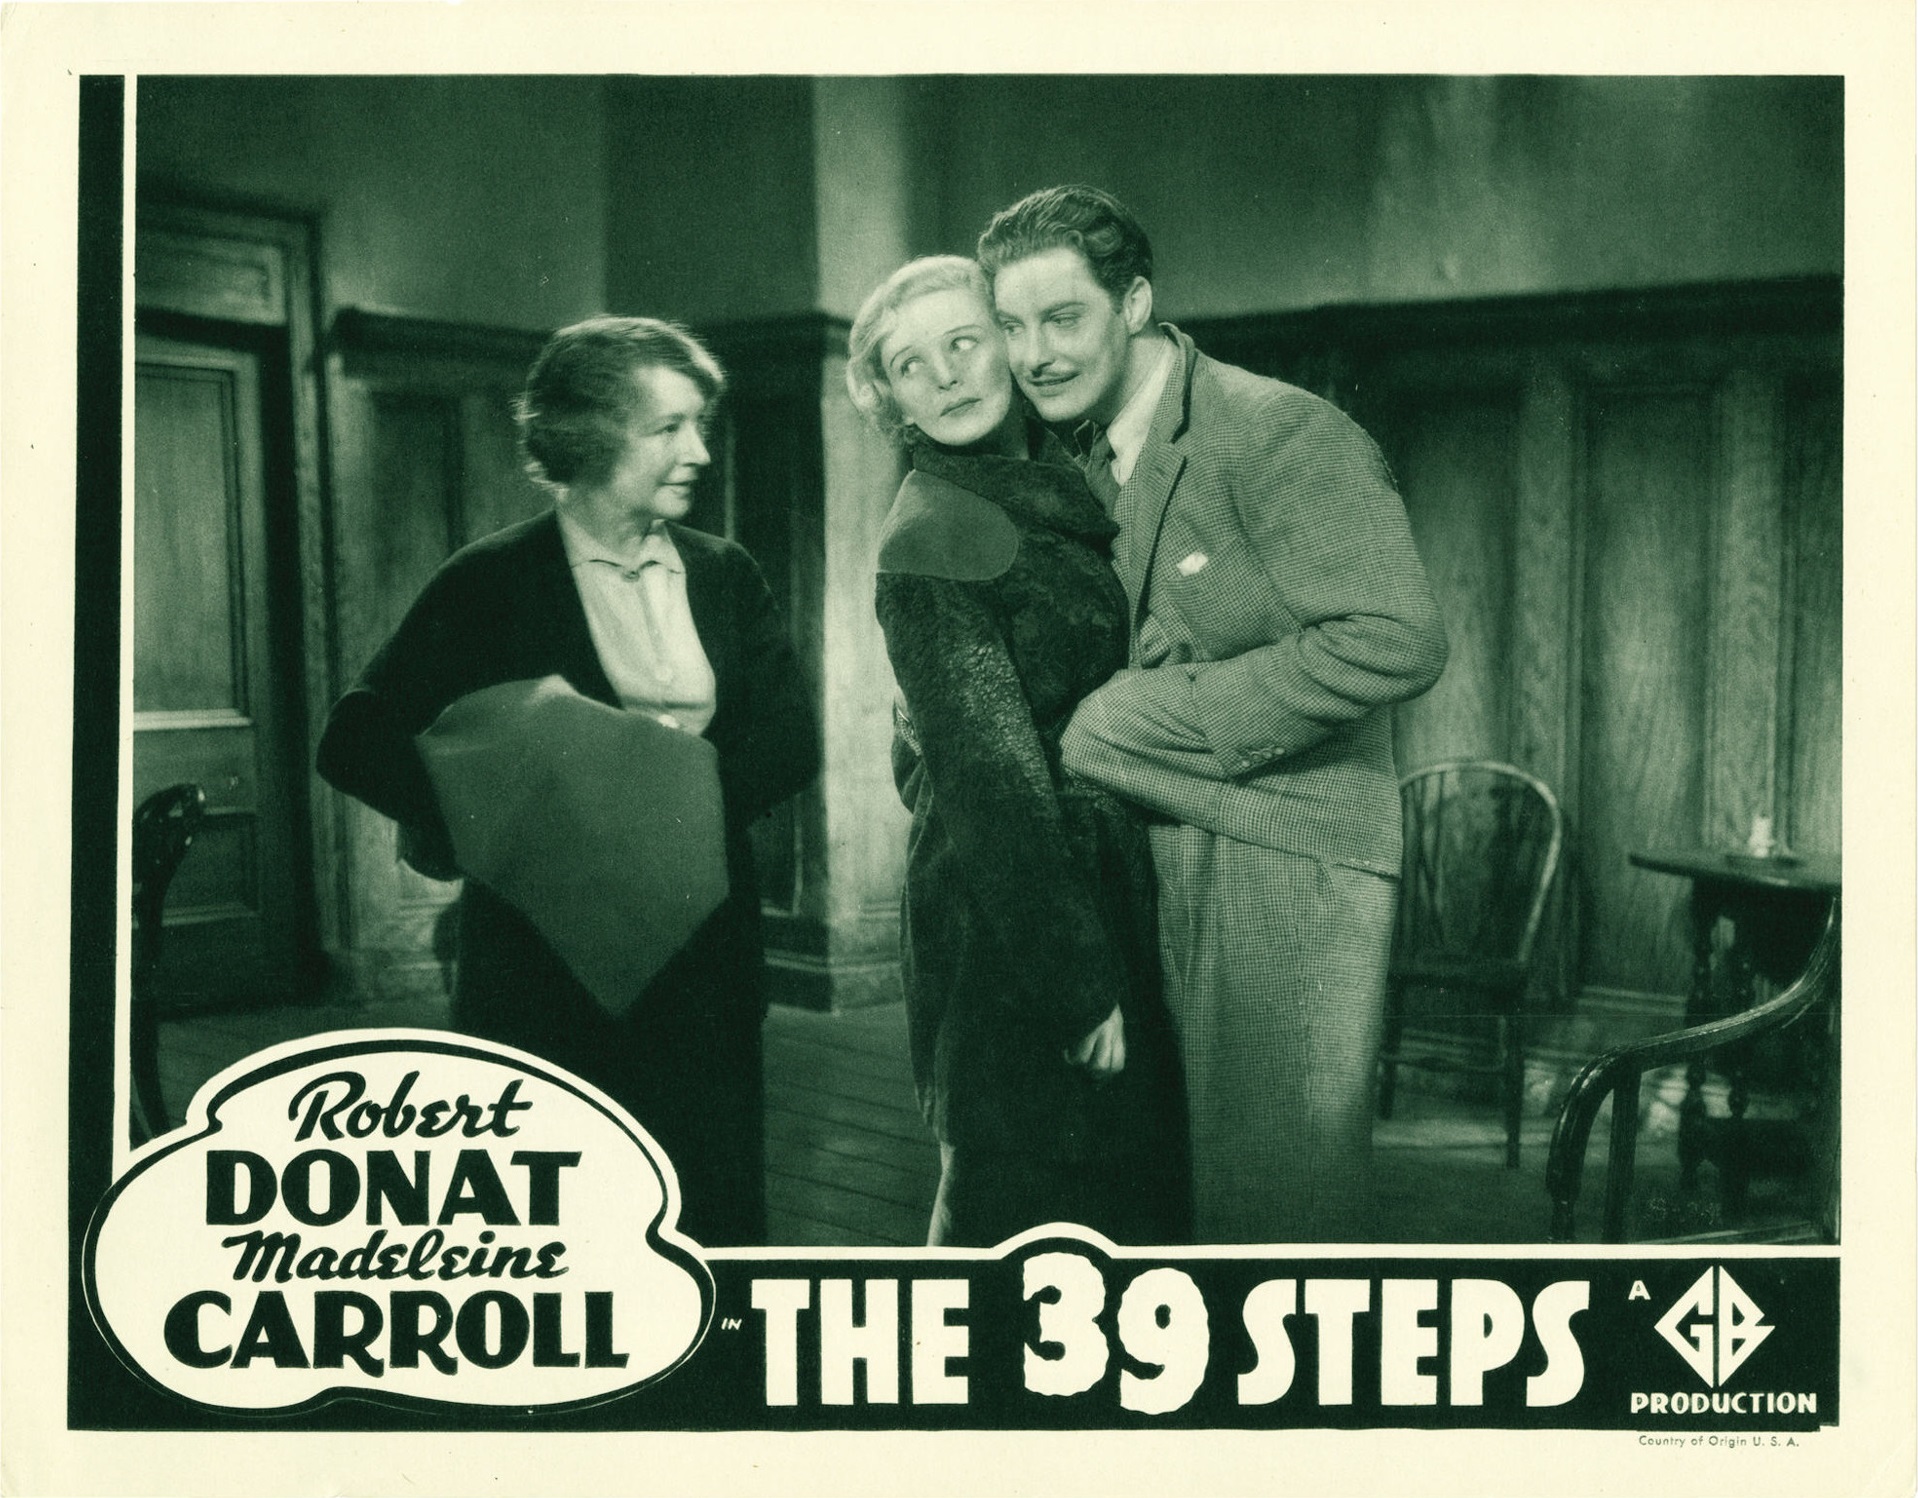 The 39 Steps (1935, dir. Alfred Hitchcock) US 1938 reissue lobby card, green variant